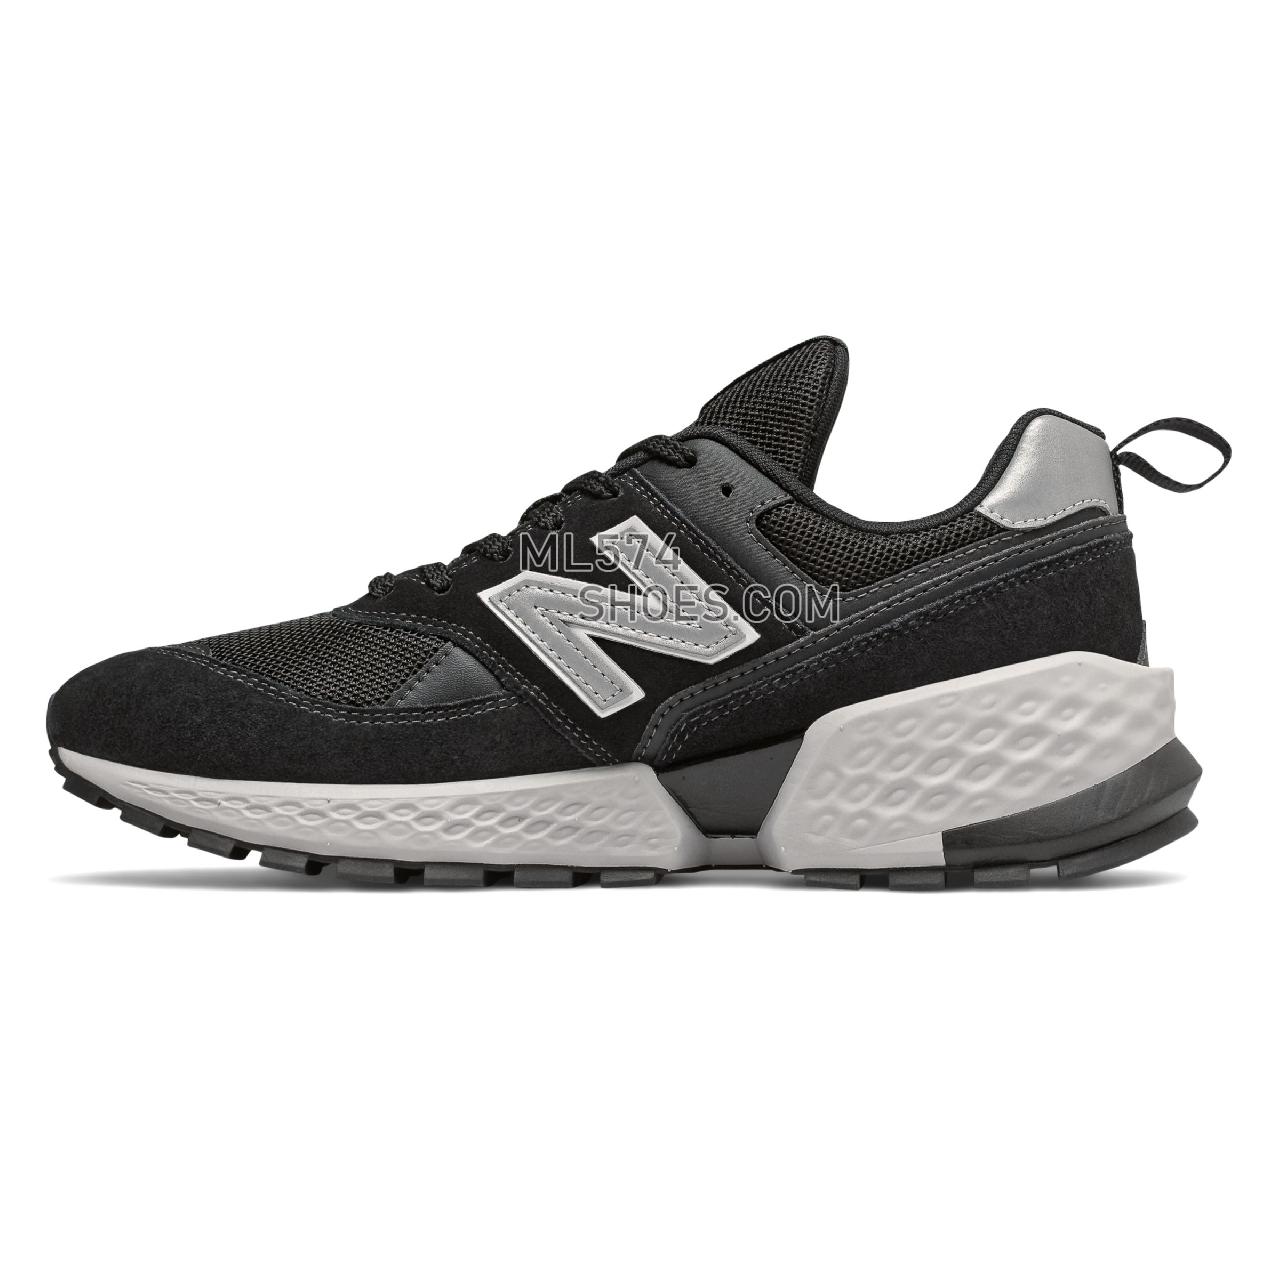 New Balance 574 Sport - Men's Sport Style Sneakers - Black with Silver Metallic - MS574ACL